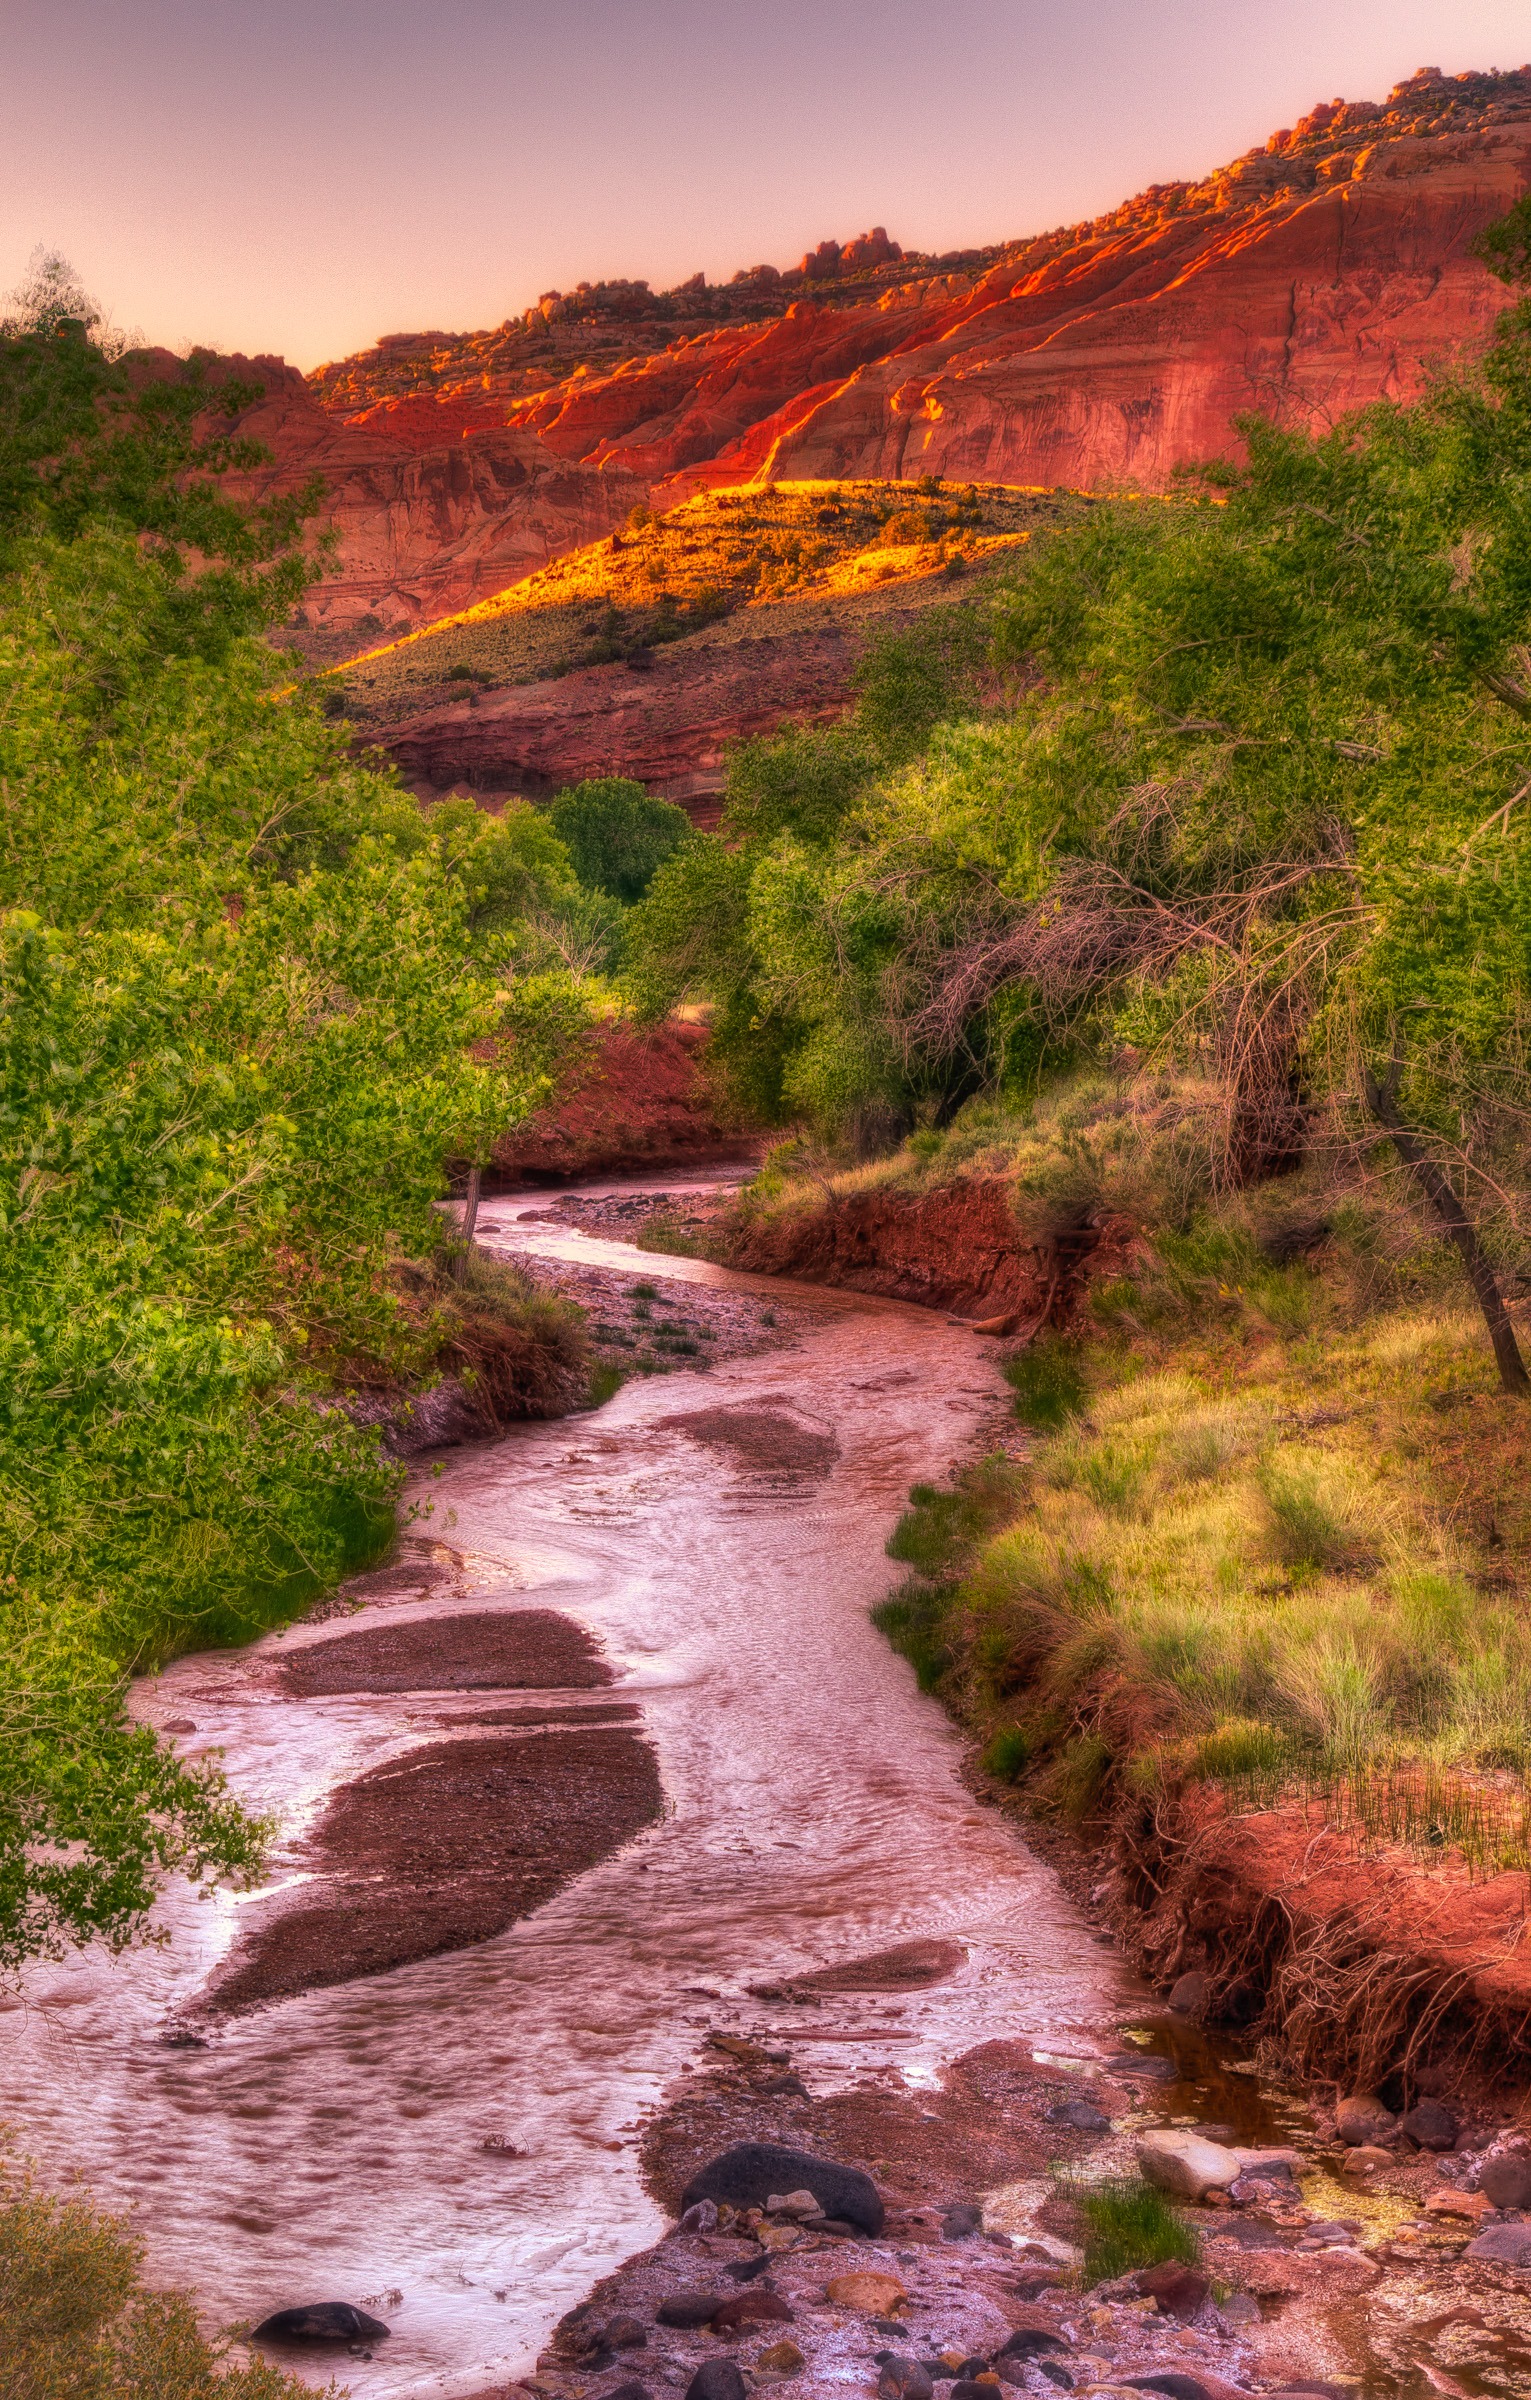 The first light catches the edges of cliffs above Sulphur creek just upstream of its junction with the Fremont River in Capitol Reef National Park.